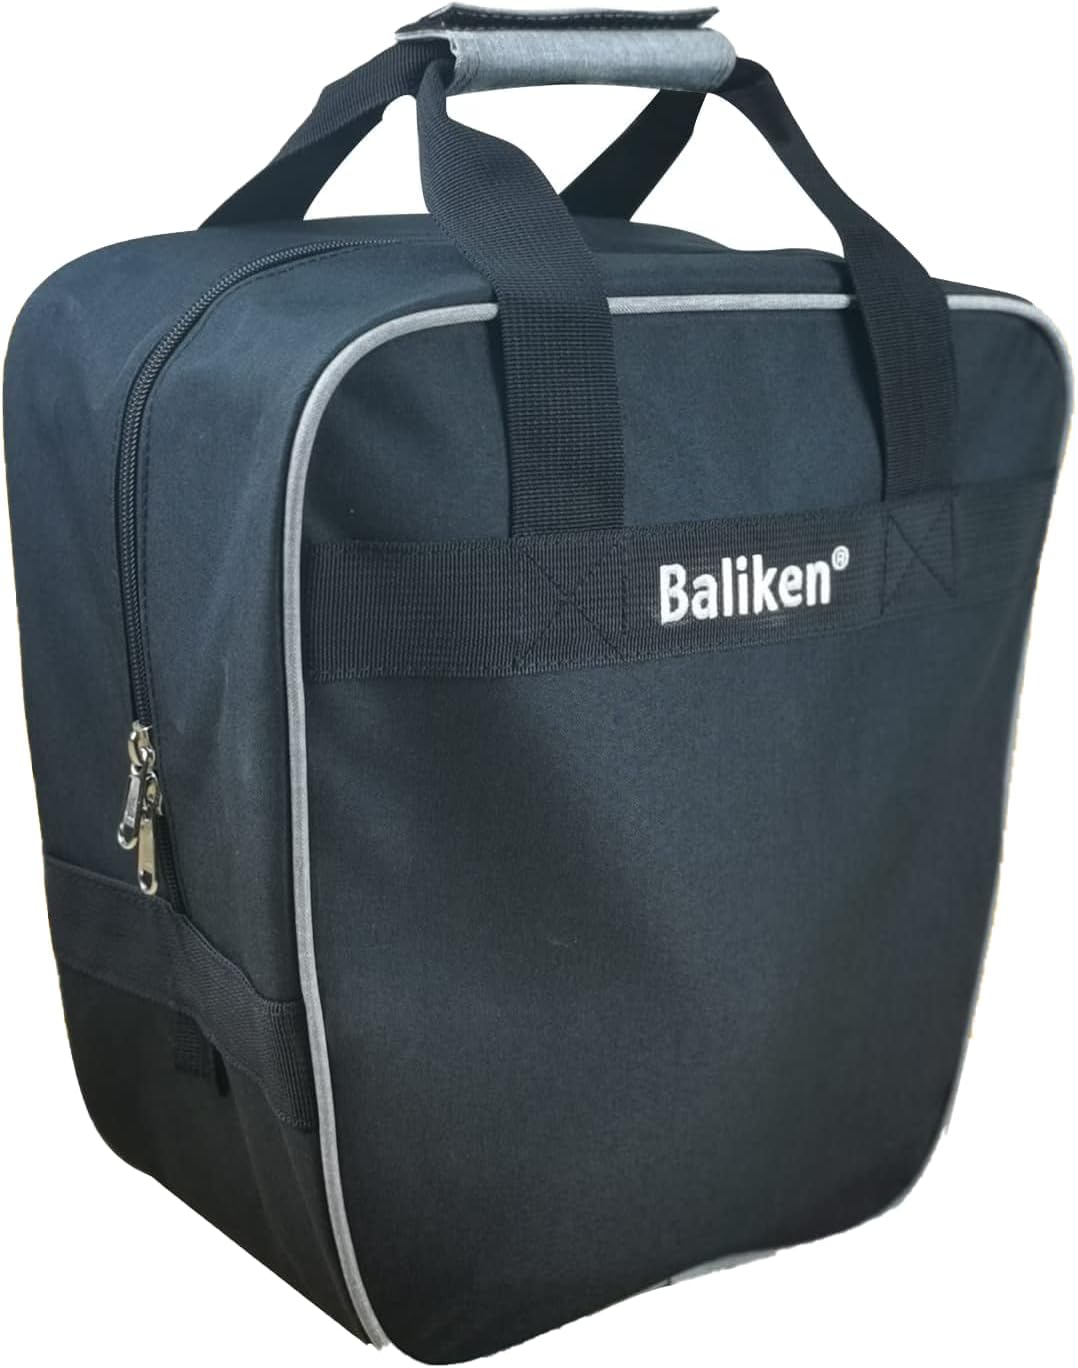 BALIKEN Bowling Single Tote Bag, Durable, Compact and Stylish Durability Easy to Carry Holds One Pair of Bowling Shoes Up to Size 11 Men Shoes